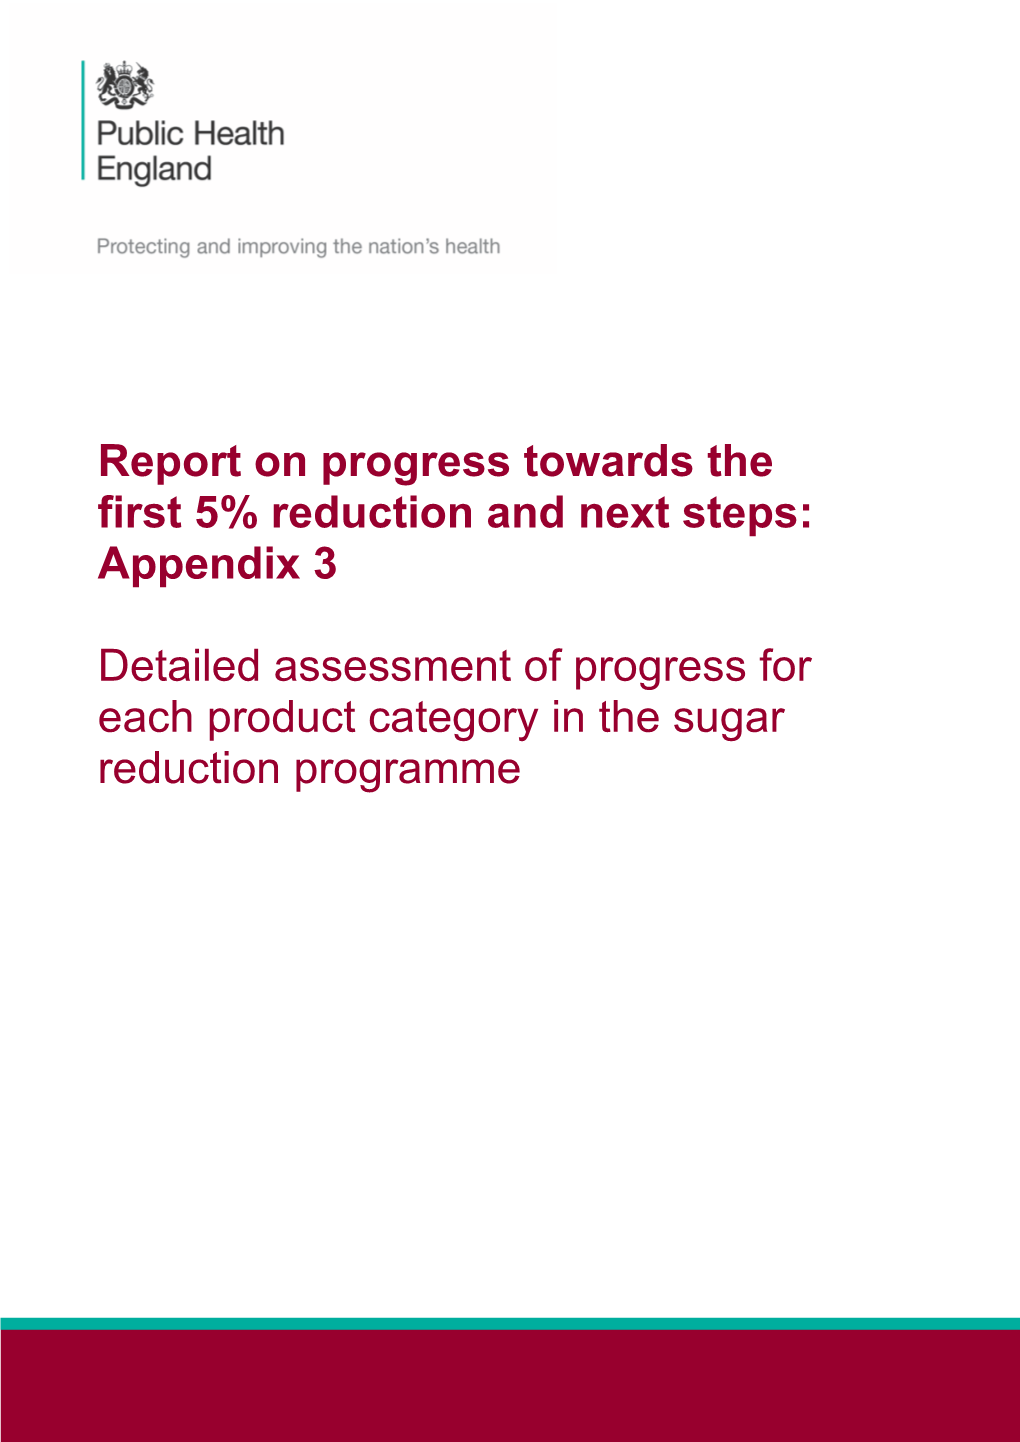 Report on Progress Towards the First 5% Reduction and Next Steps: Appendix 3